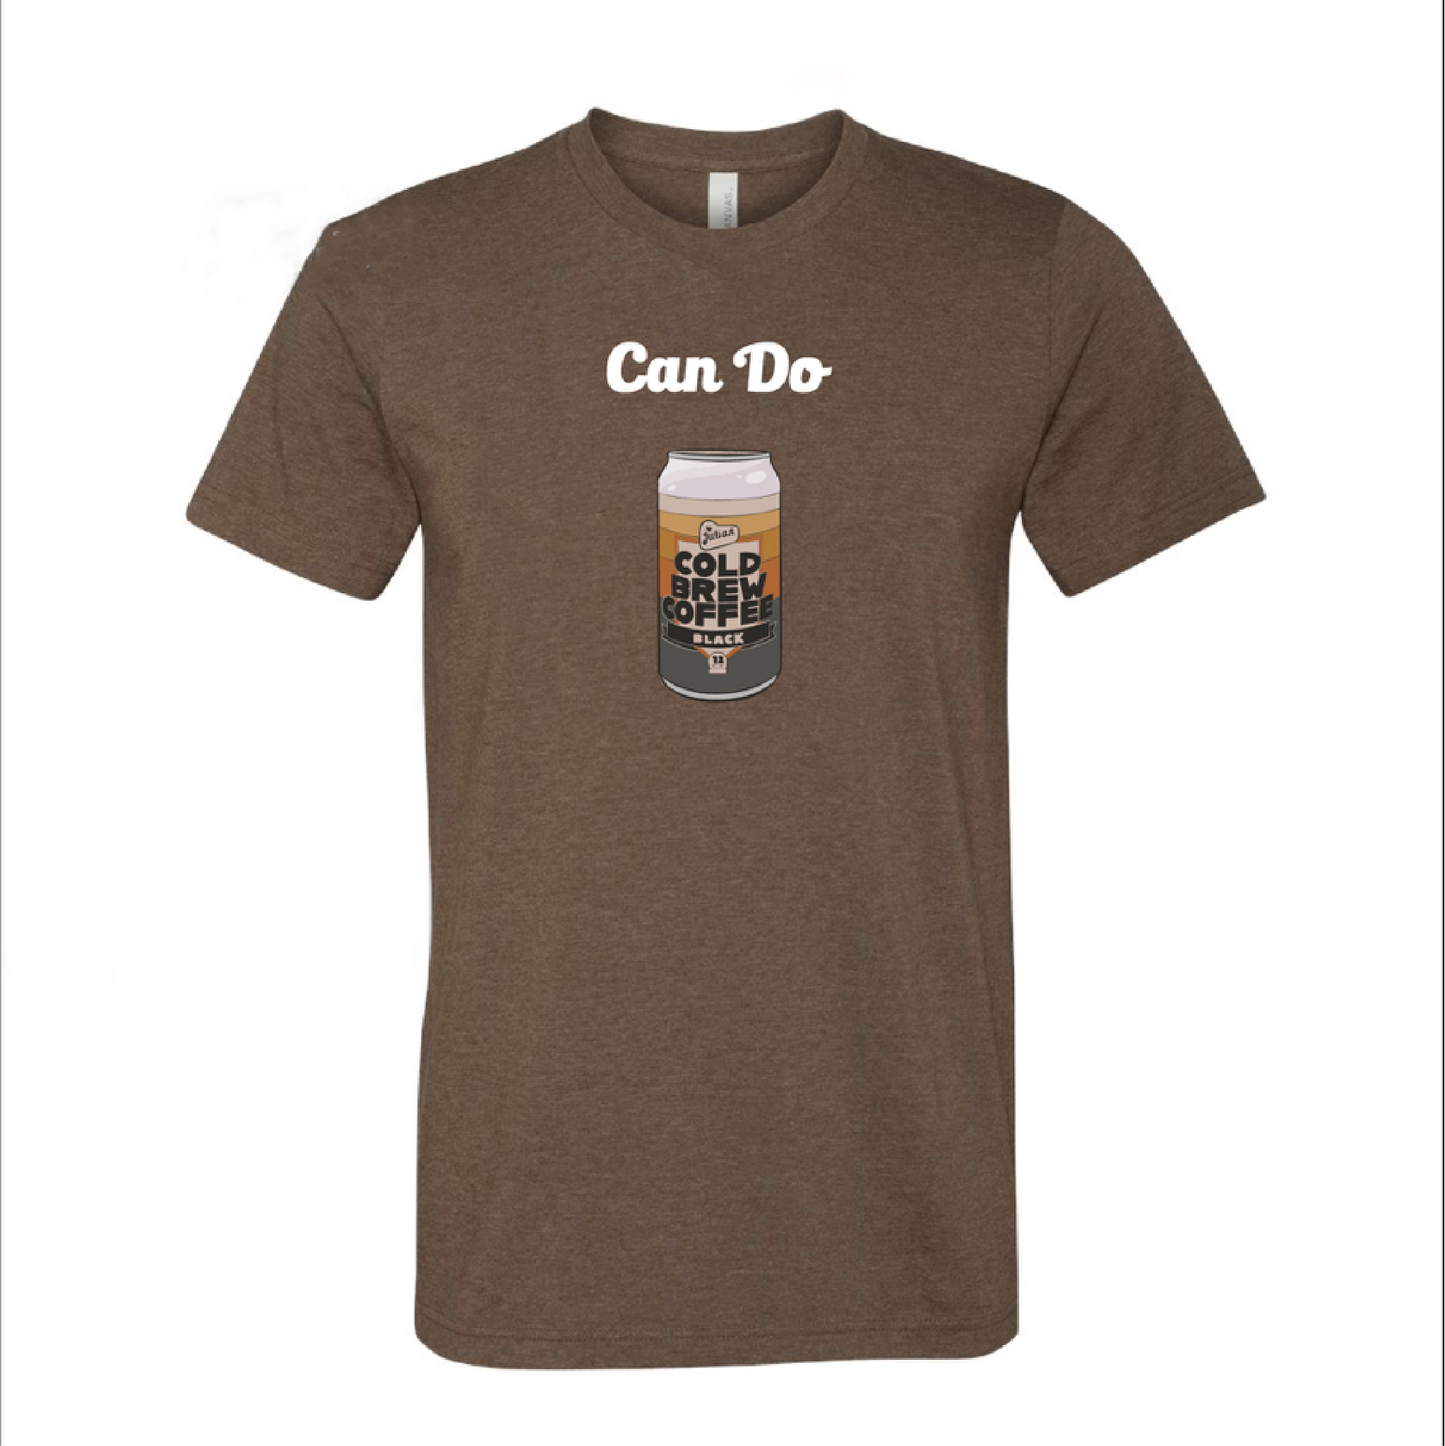 Can Do Brown T-shirt